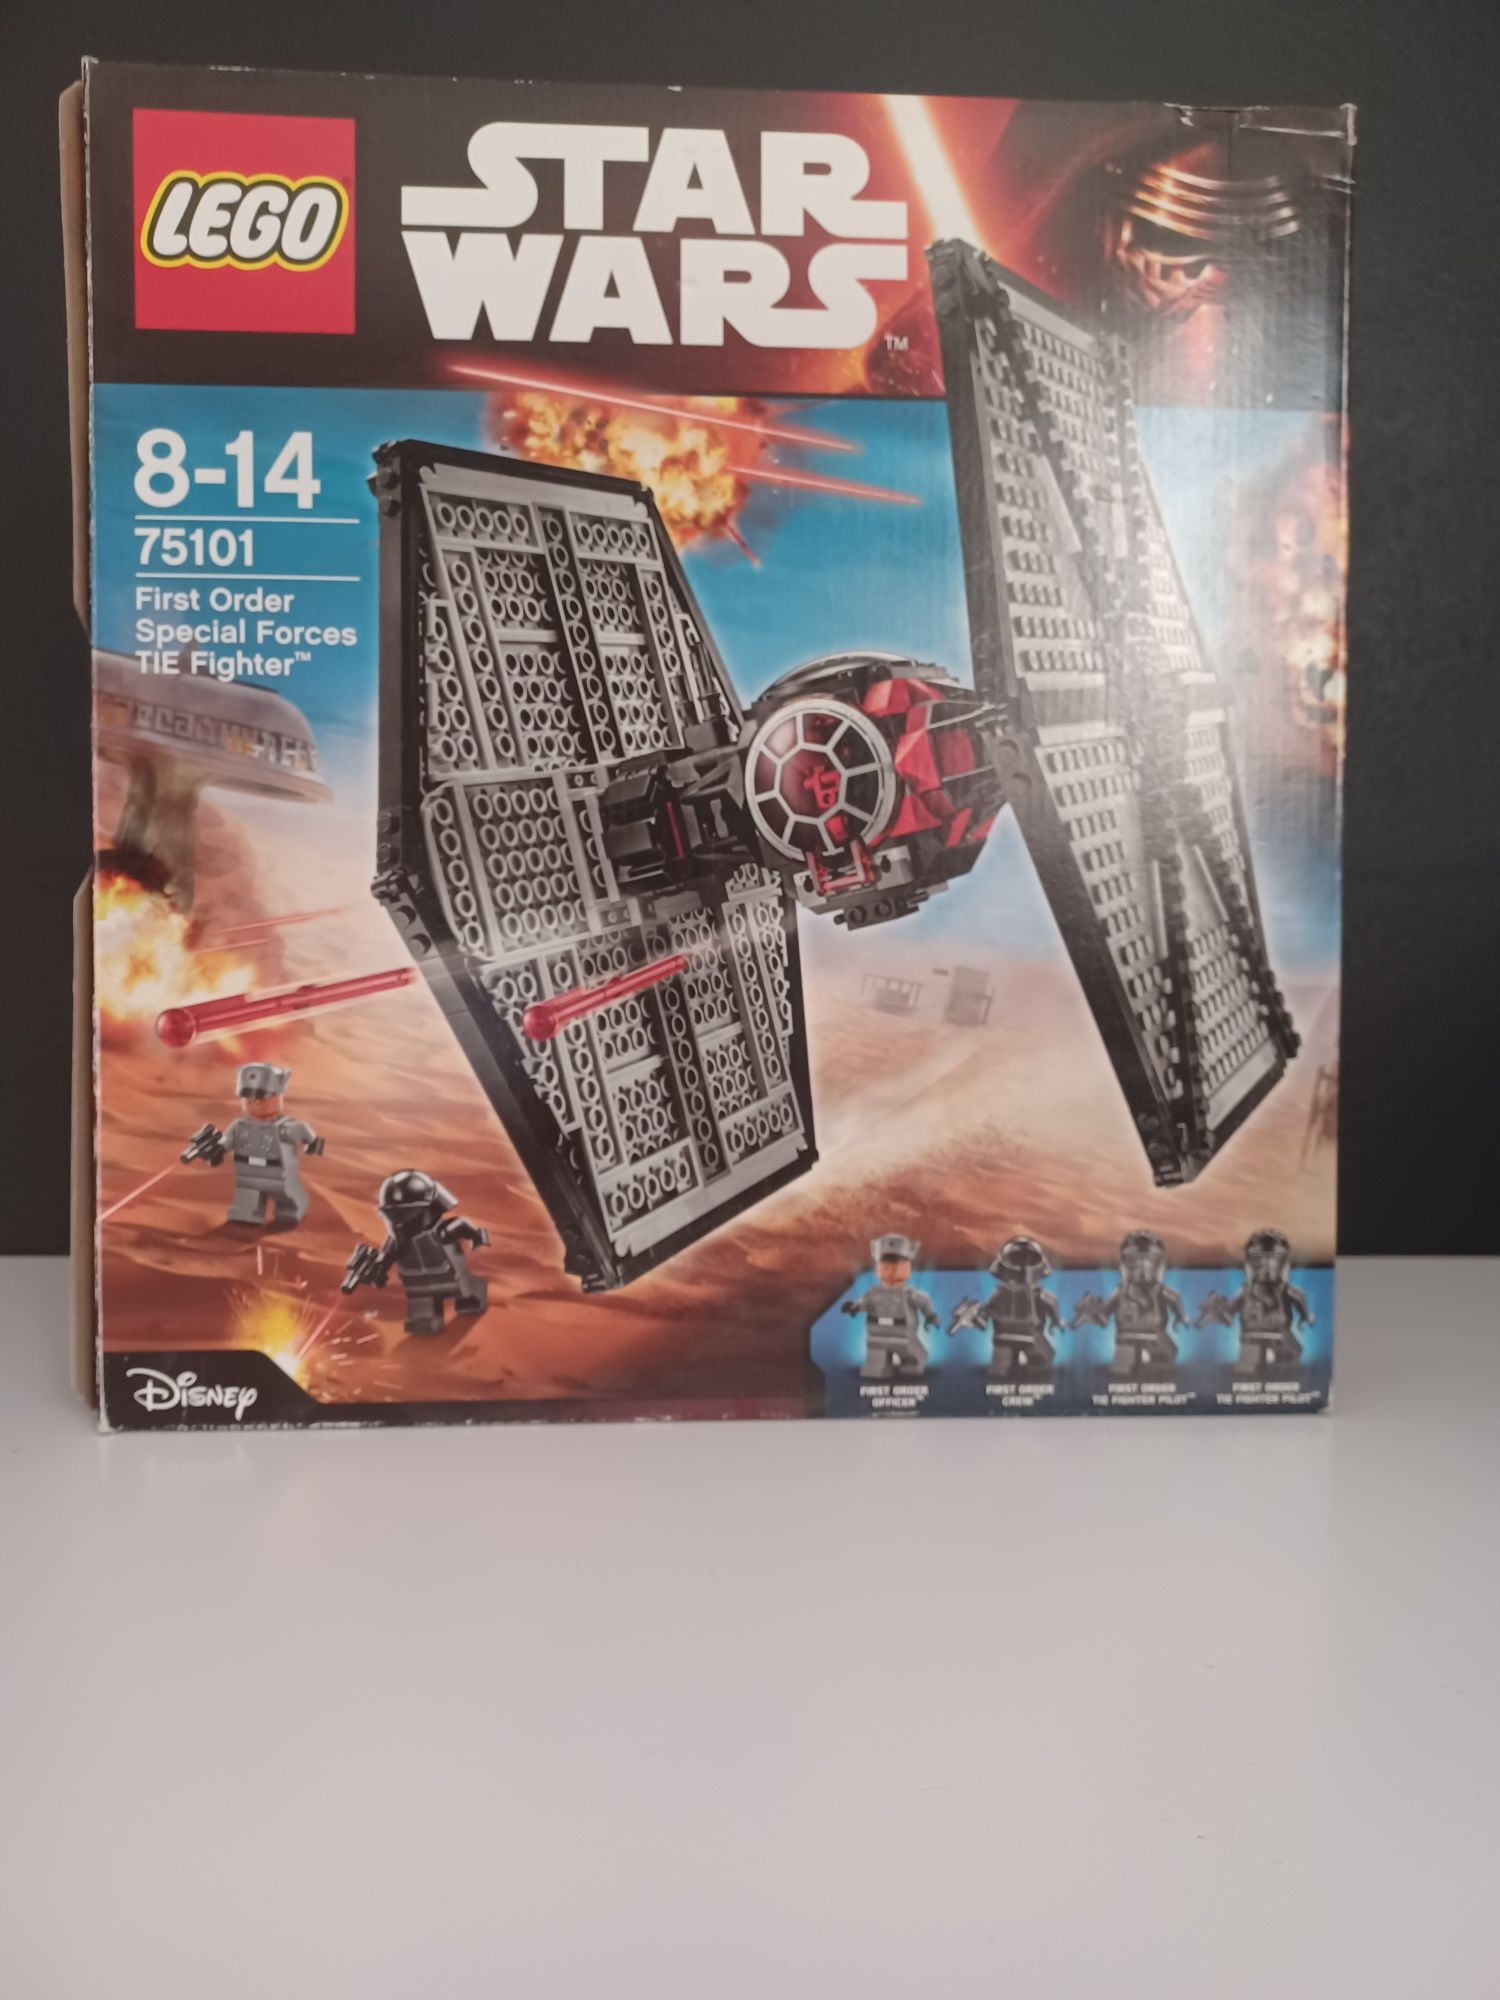 LEGO Star Wars First Order Special Forces TIE Fighter